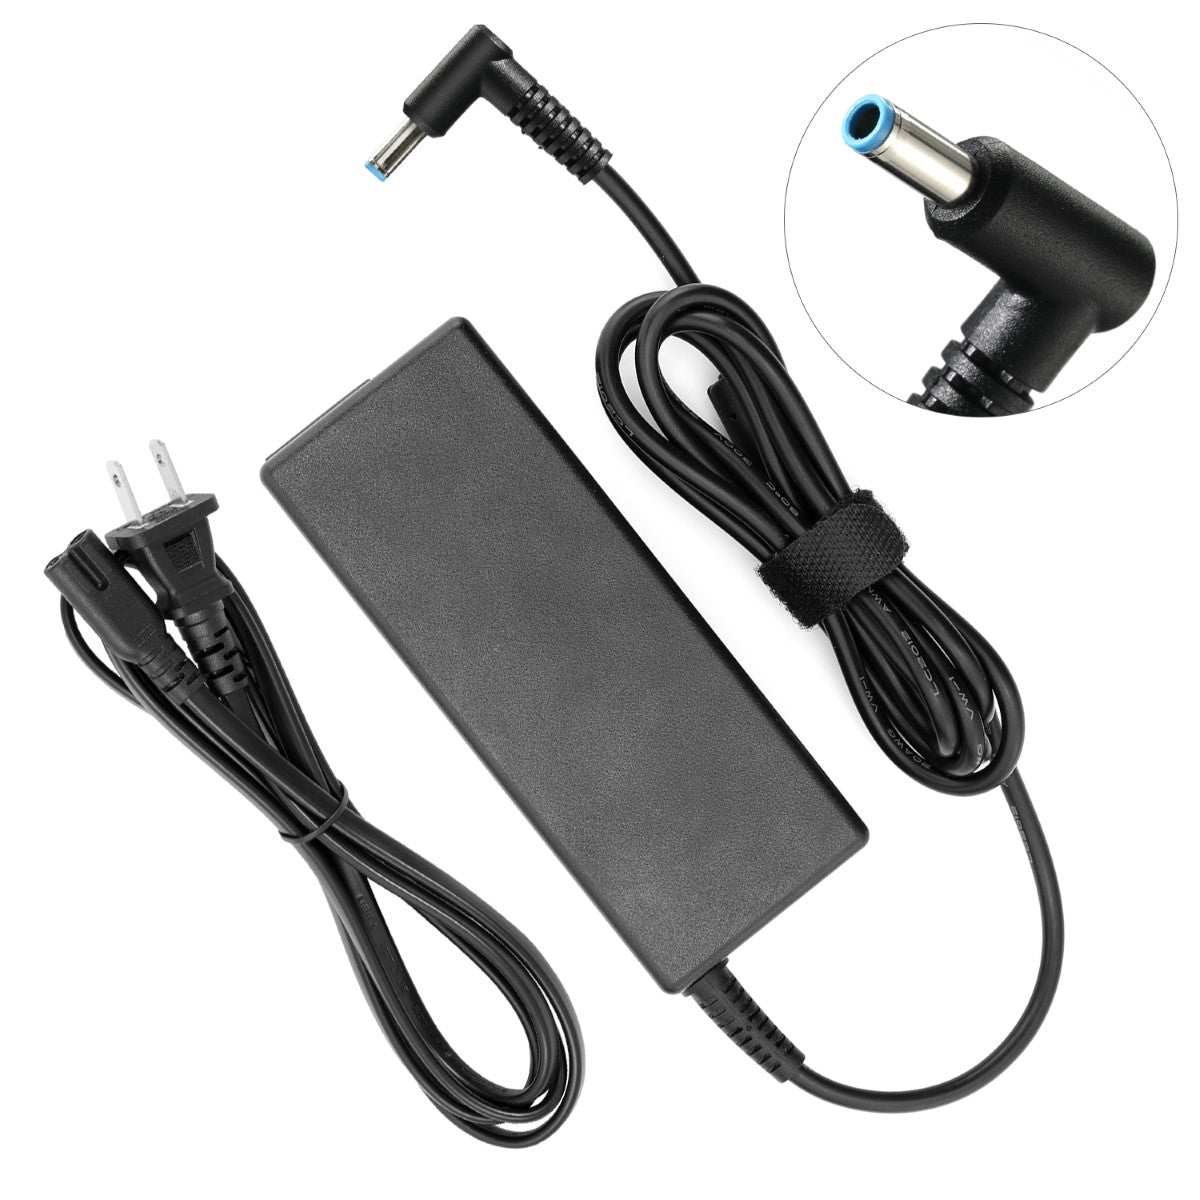 AC Adapter Charger for HP Chromebook 14-ak010nr Notebook.